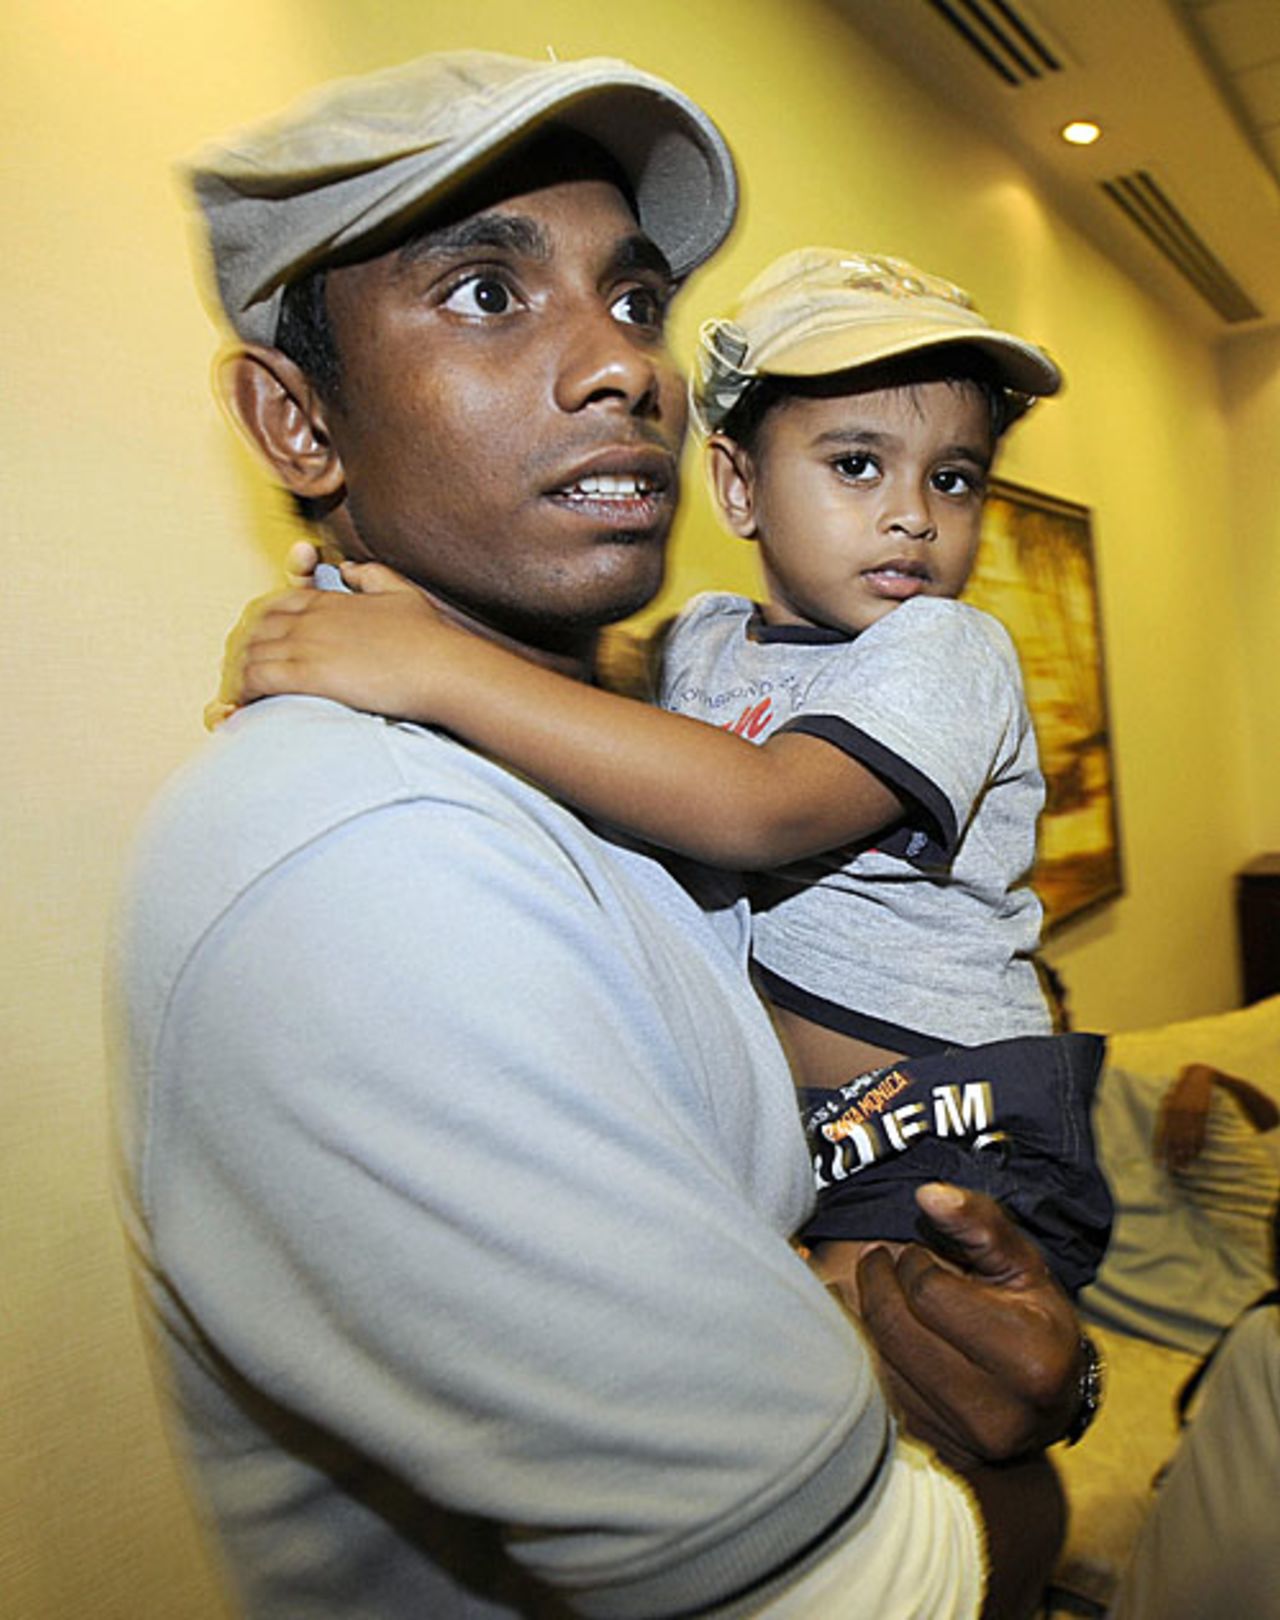 Thilan Thushara holds his son at Colombo airport, Colombo, March 3, 2009